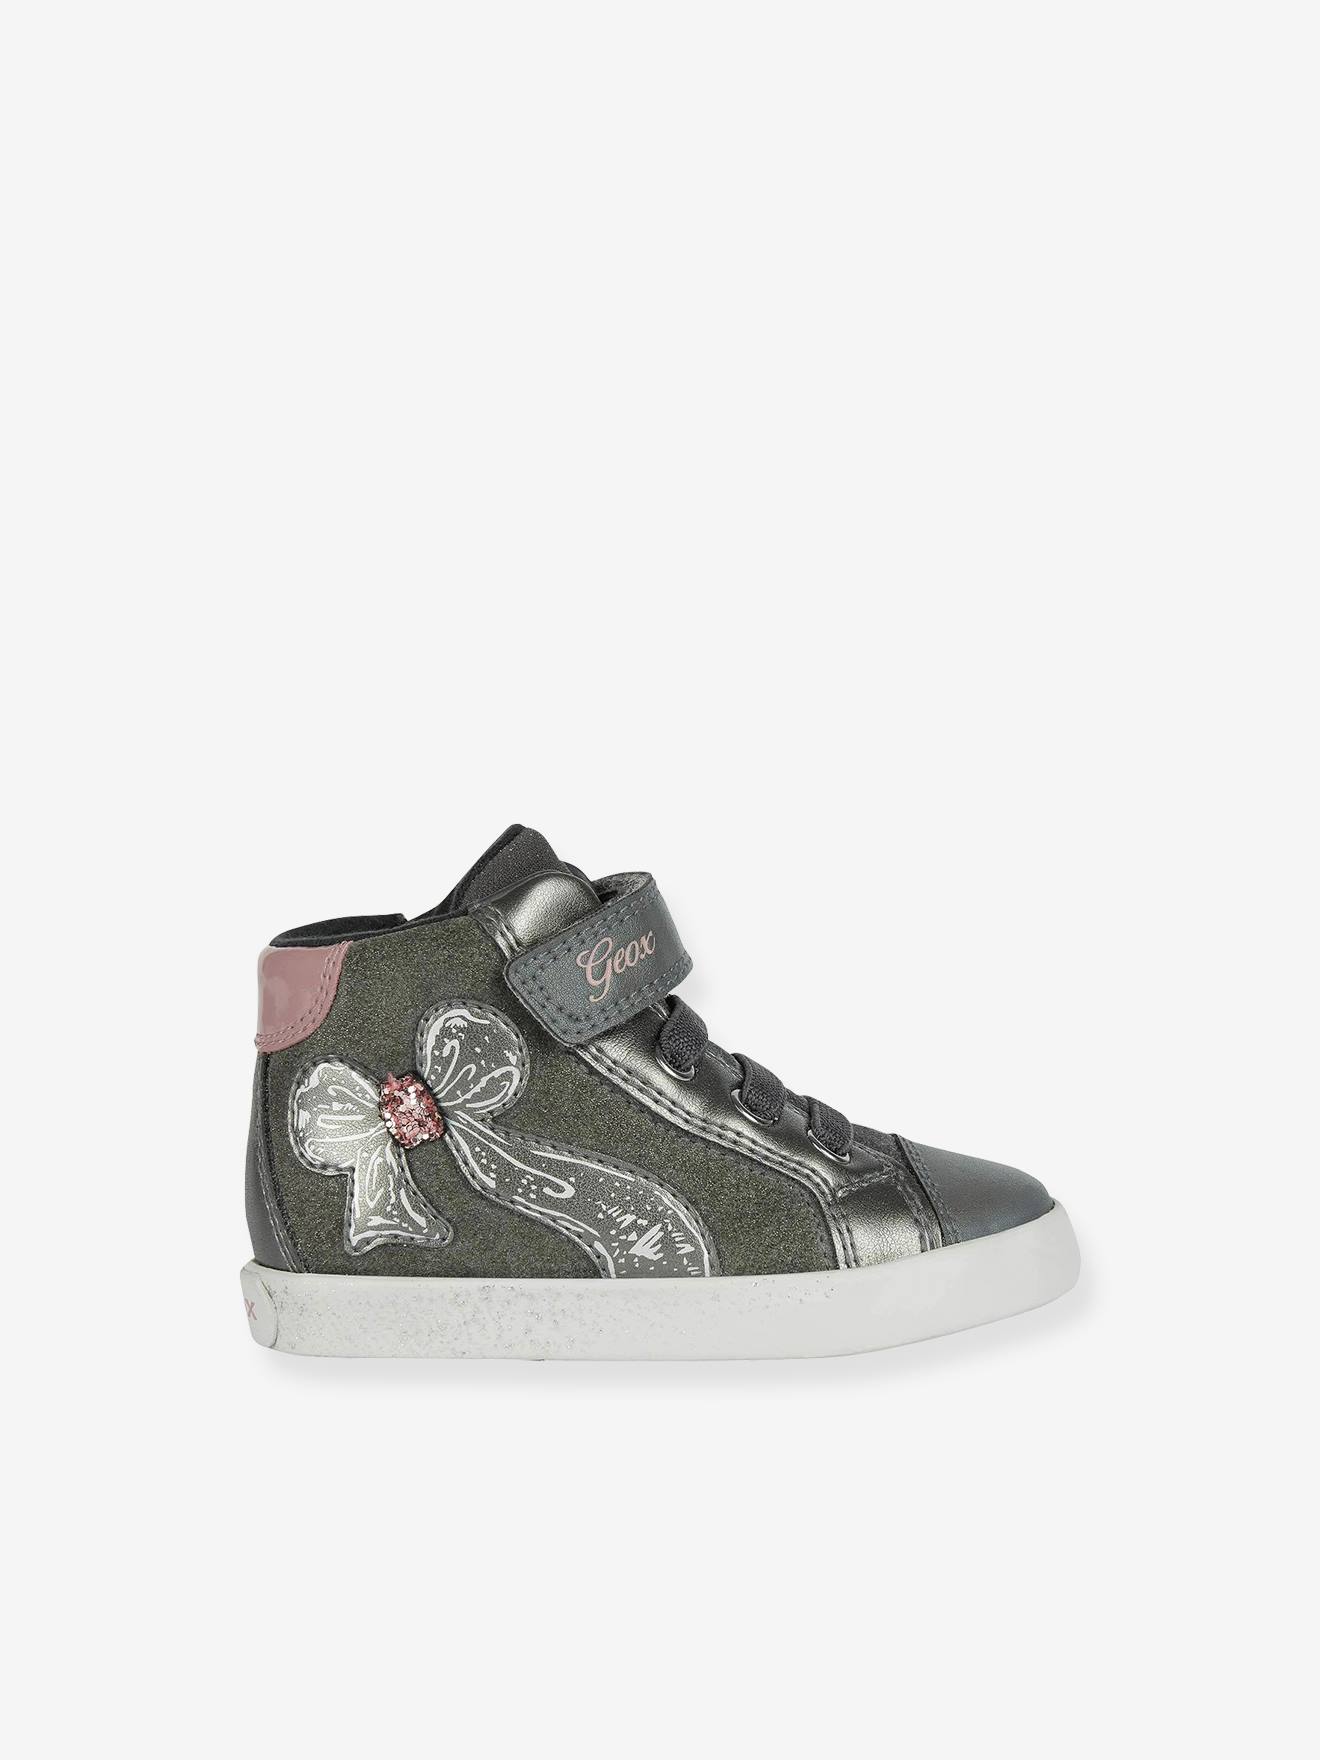 Baskets Mid fille Kilwi gris, Chaussures